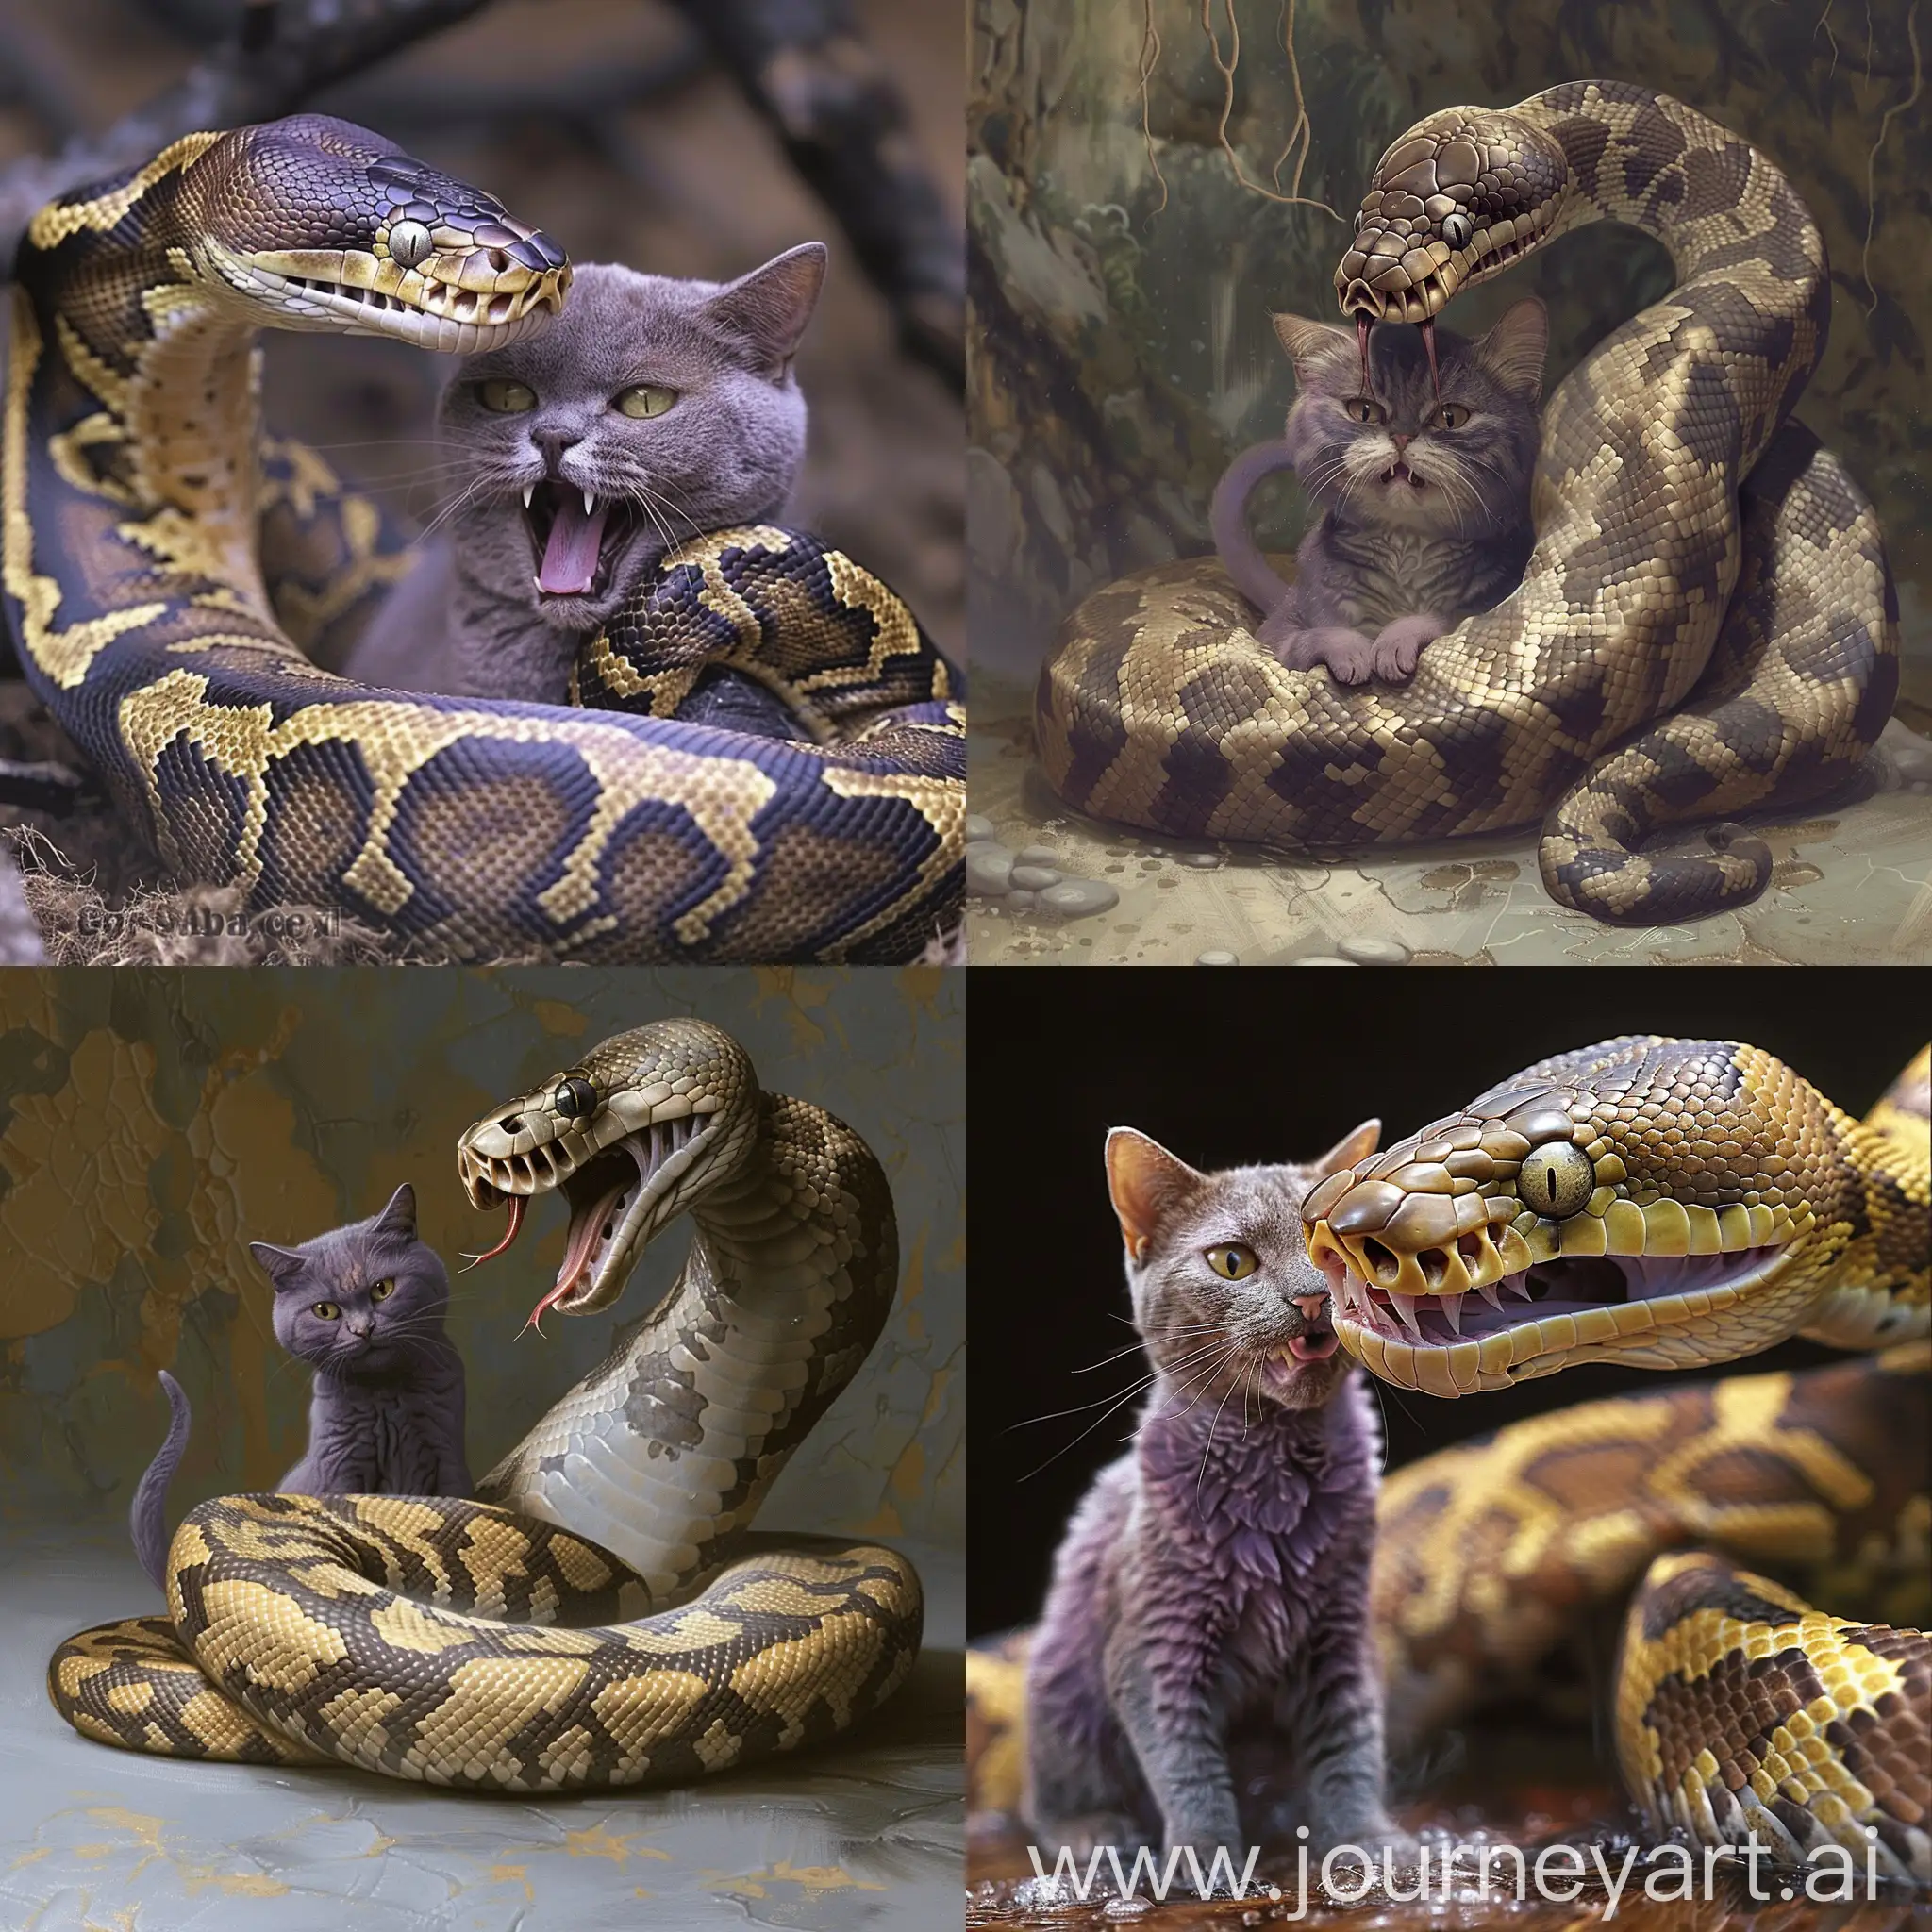 Aggressive-Python-Snake-Squeezing-Purple-Cat-in-Distress